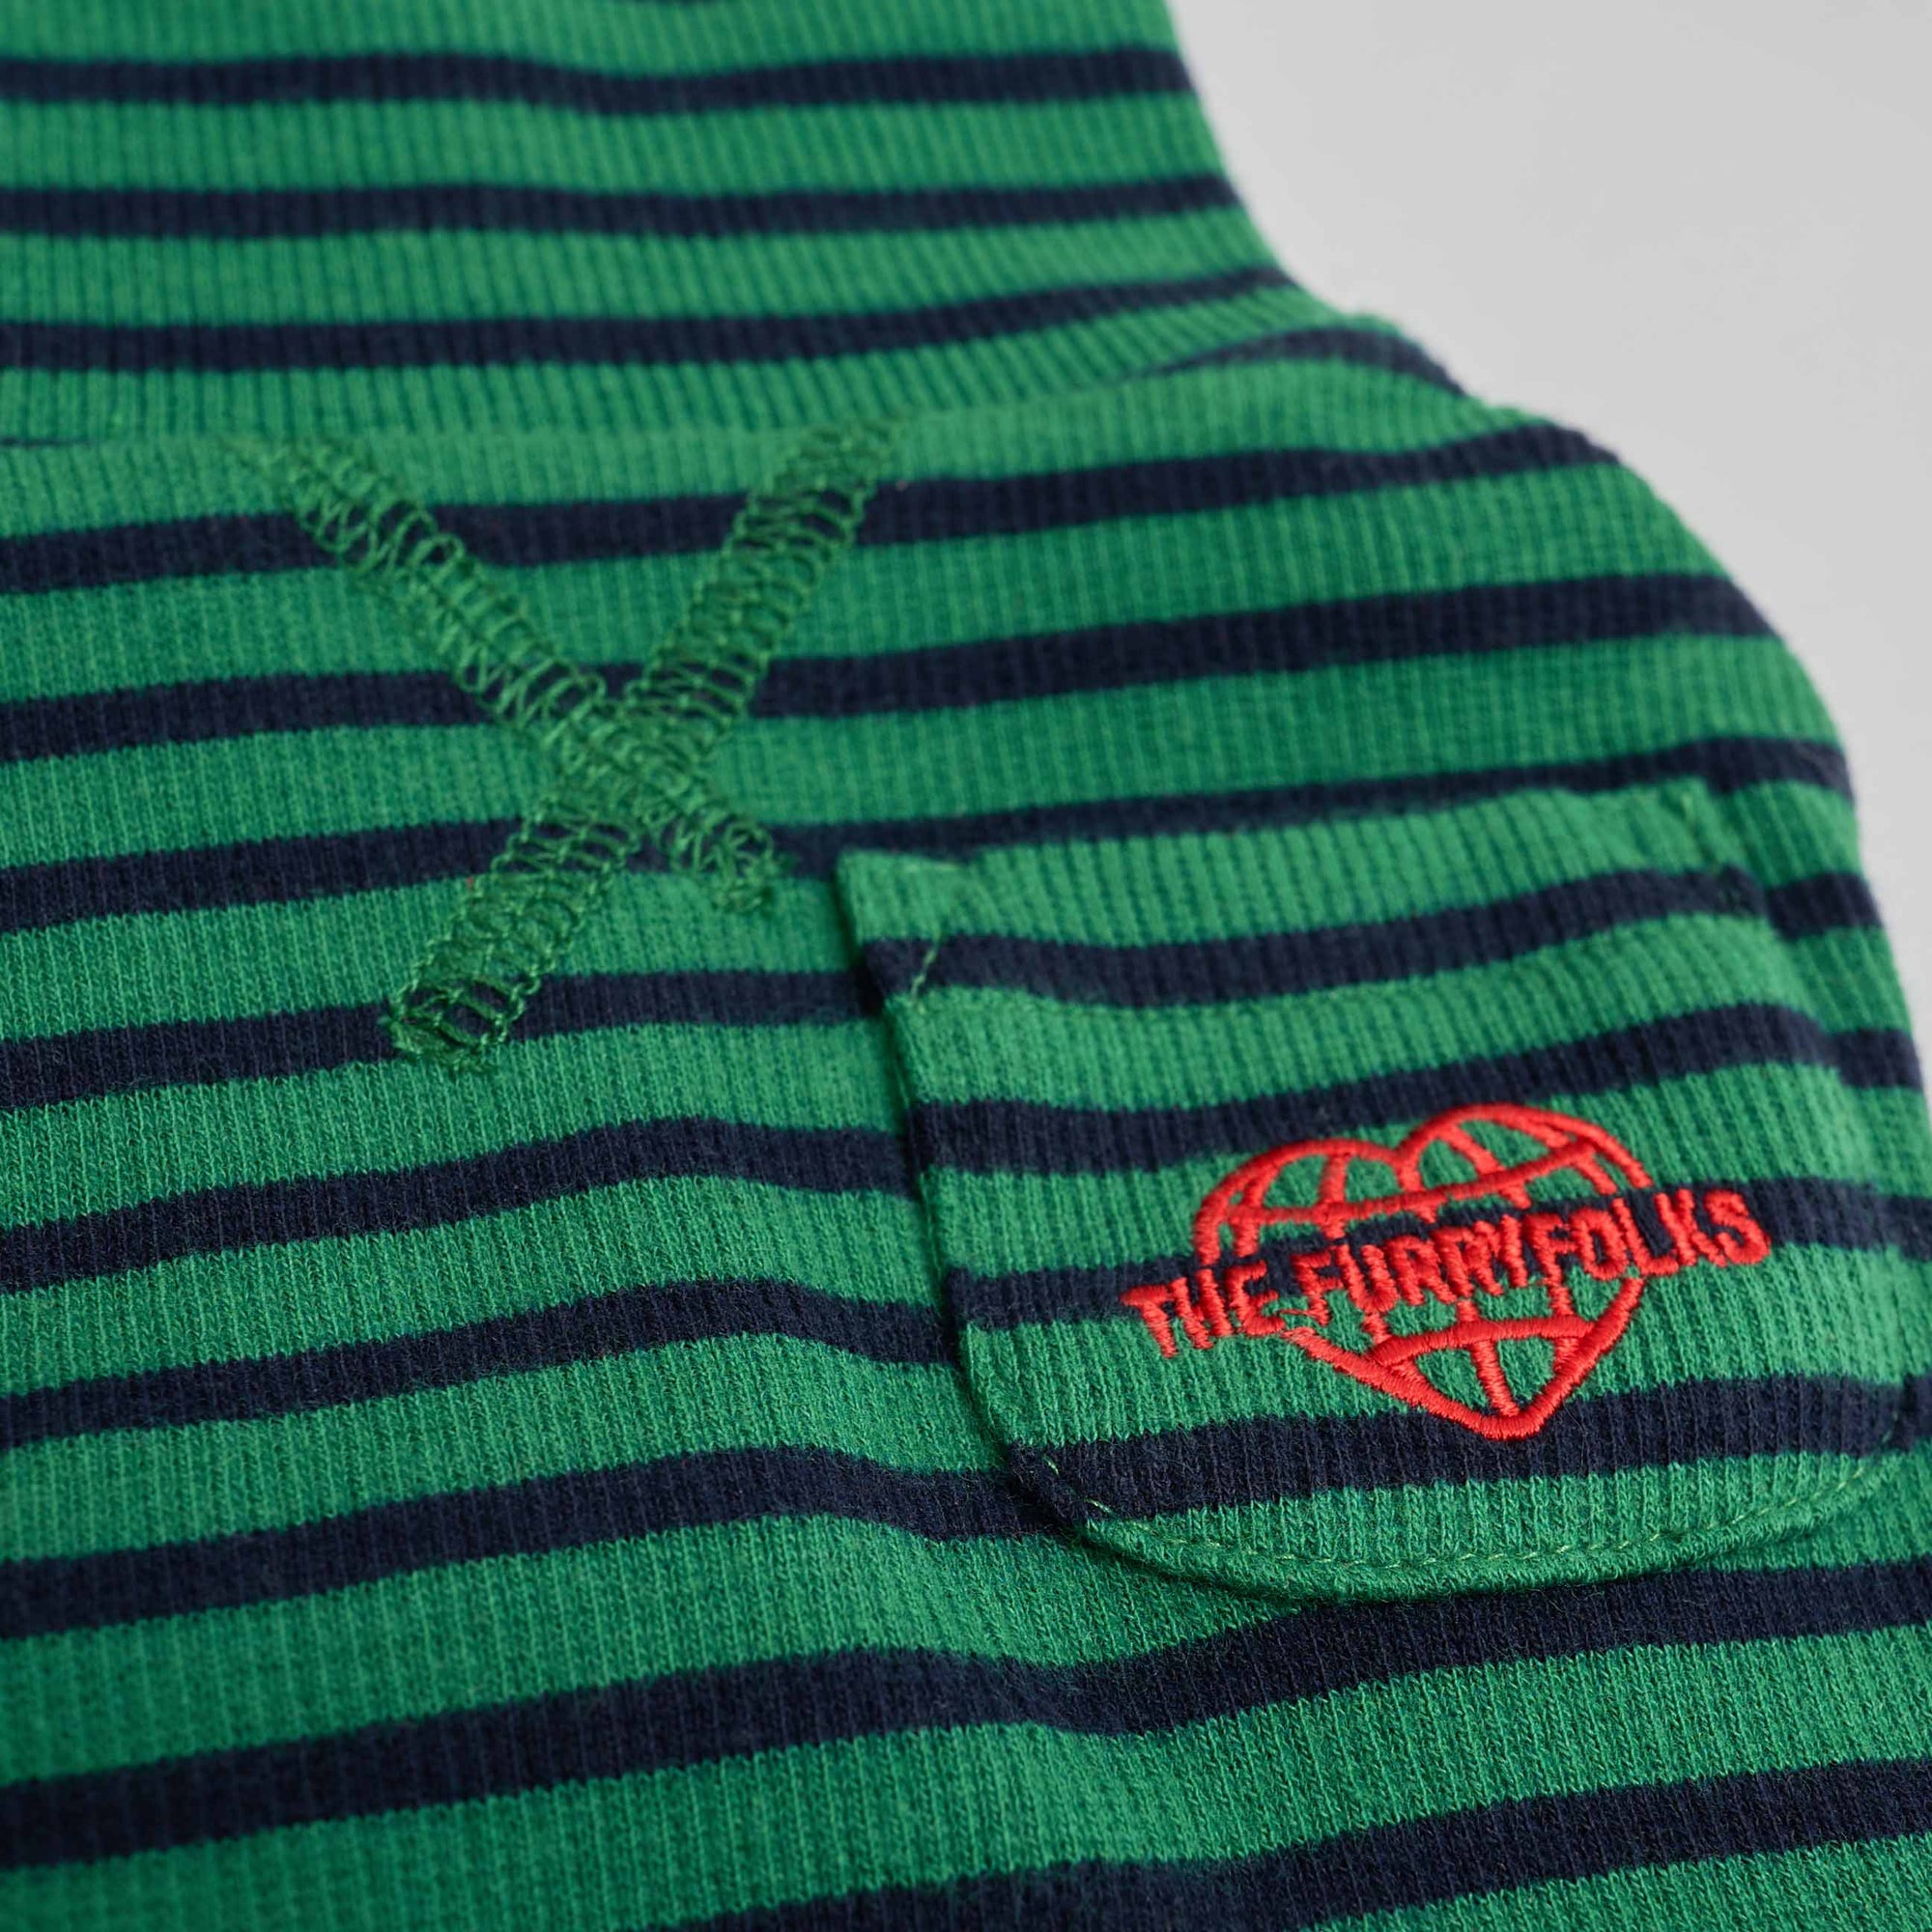 Close-up of green and navy dog shirt fabric with 'THE FURRYFOLKS' logo embroidery and decorative cross-stitch detail.